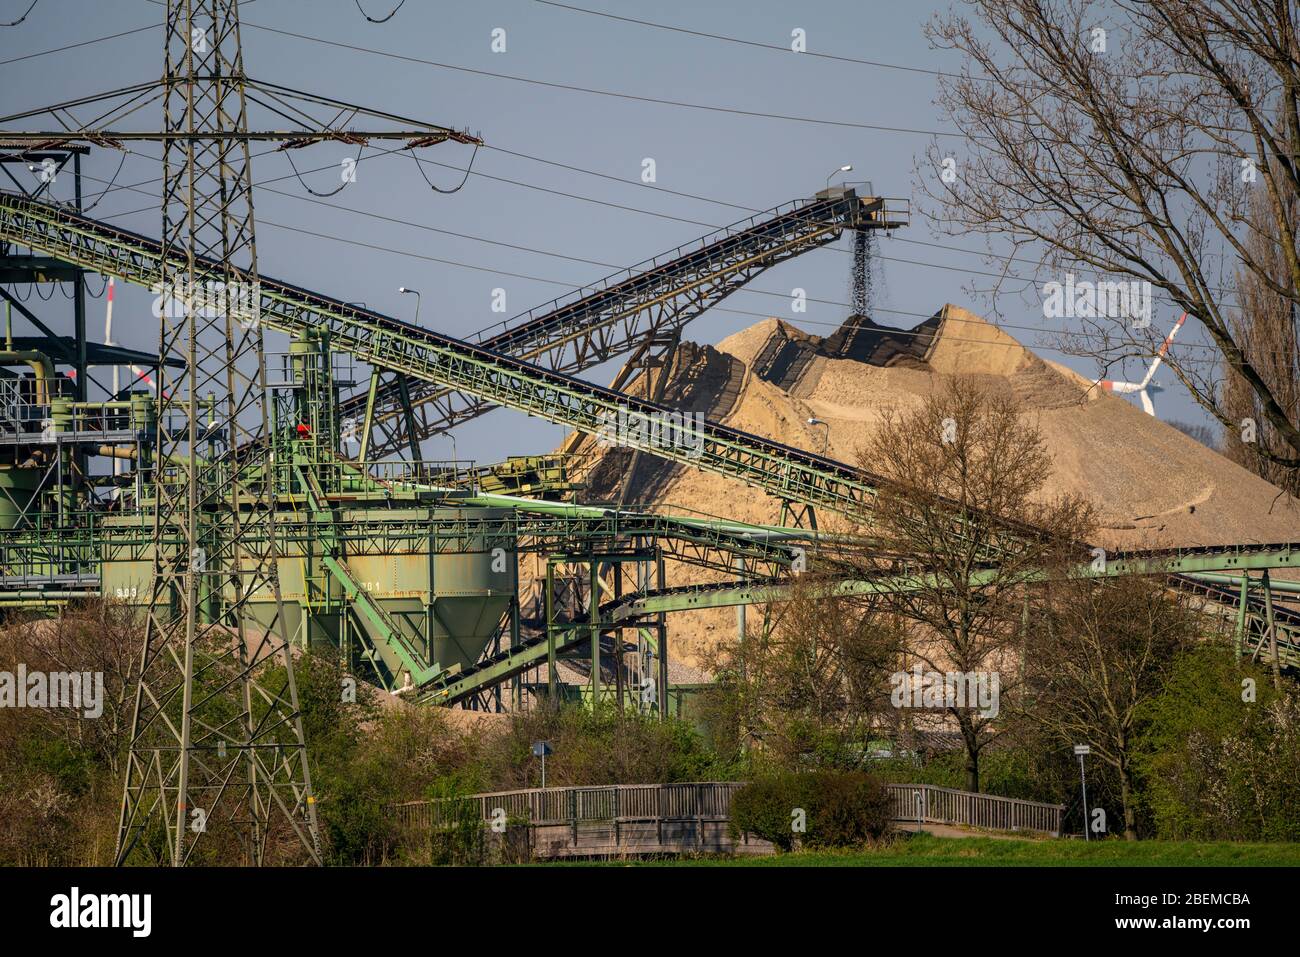 Holemans gravel plant, near Rees, gravel and sand mining on the Lower Rhine, Germany, Stock Photo